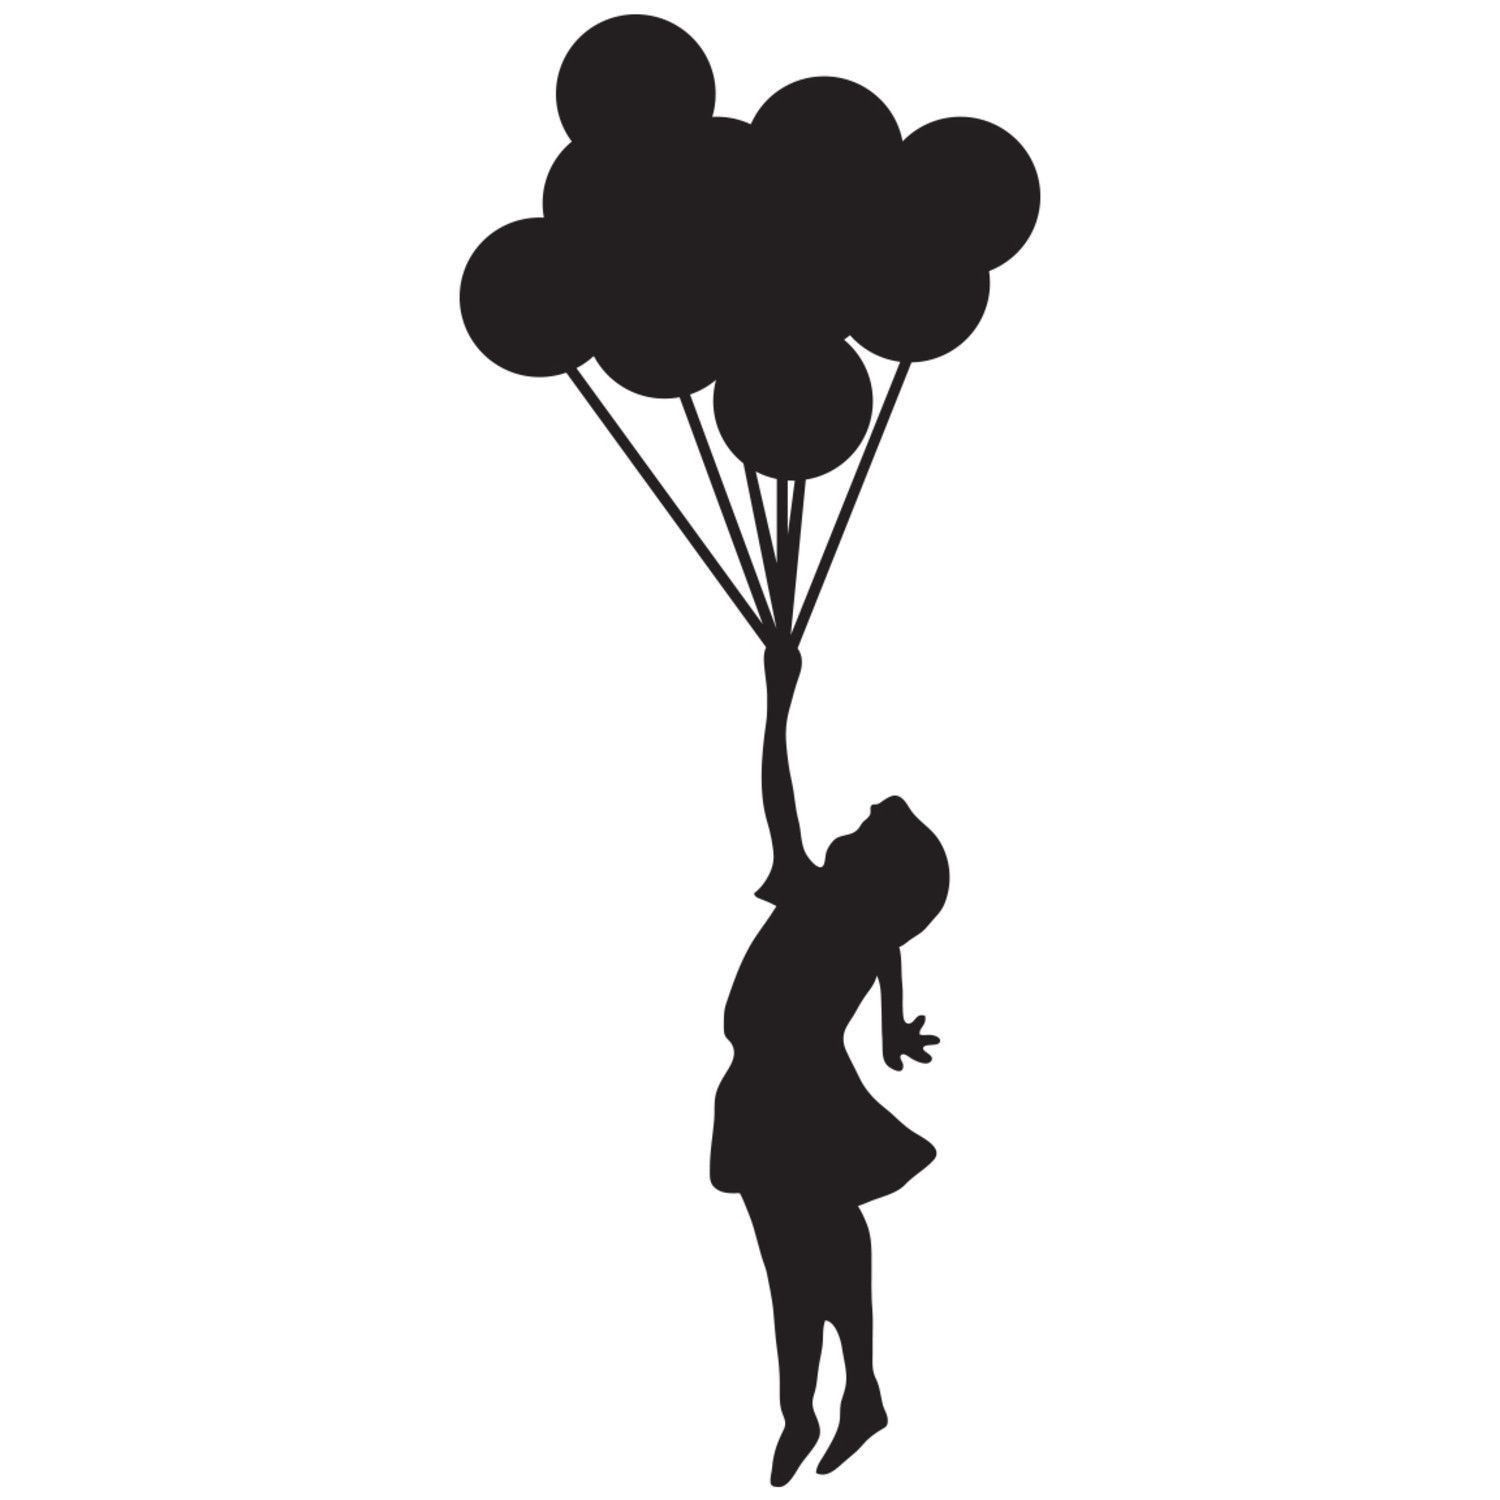 Umbrella and Silhouettes | girl holding balloons silhouette Car ...